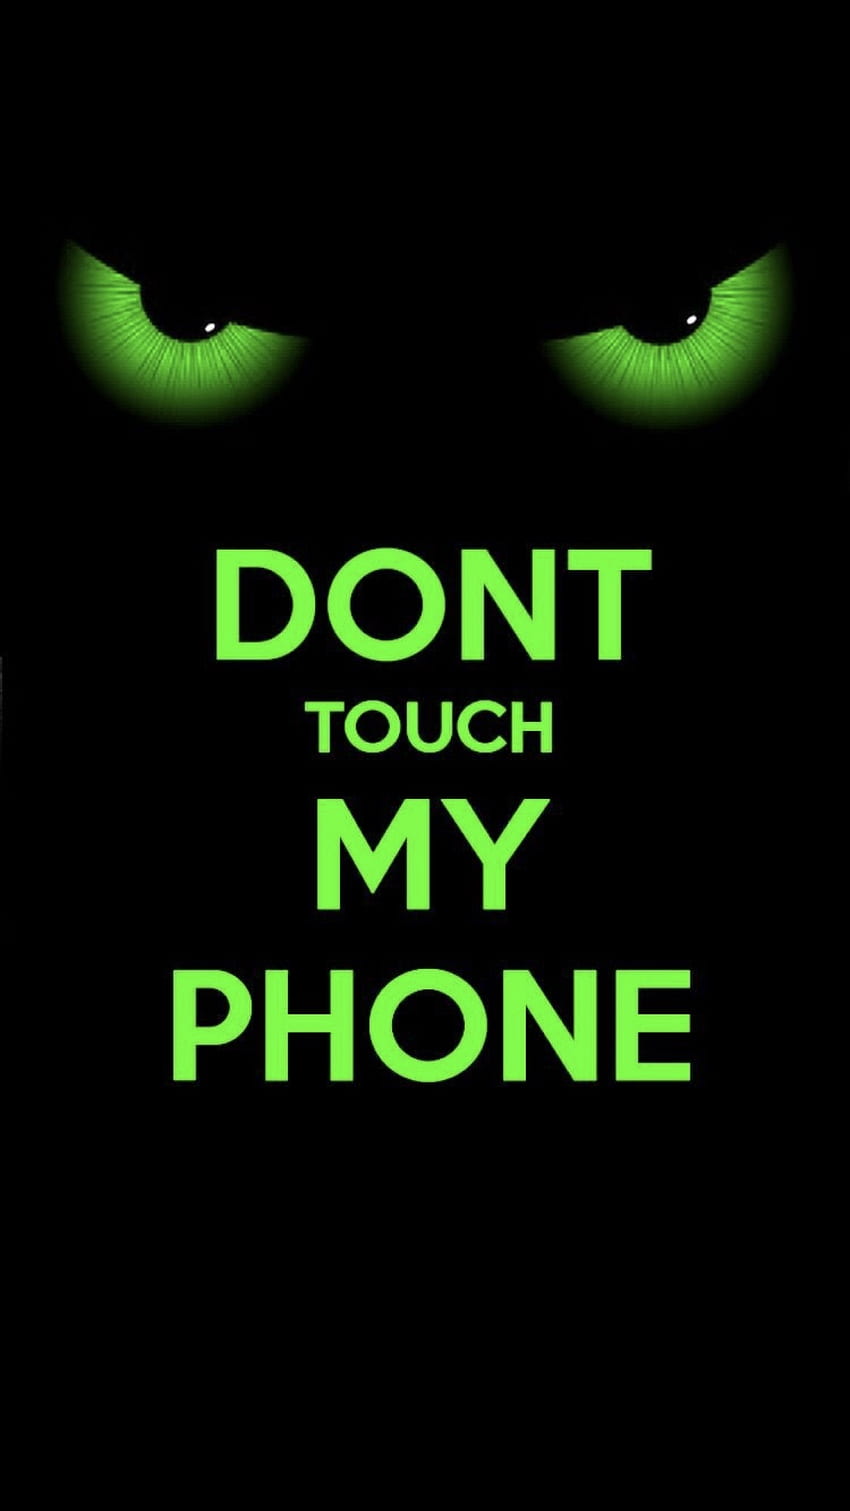 Download Double Don't Touch My Phone Stitch Wallpaper | Wallpapers.com